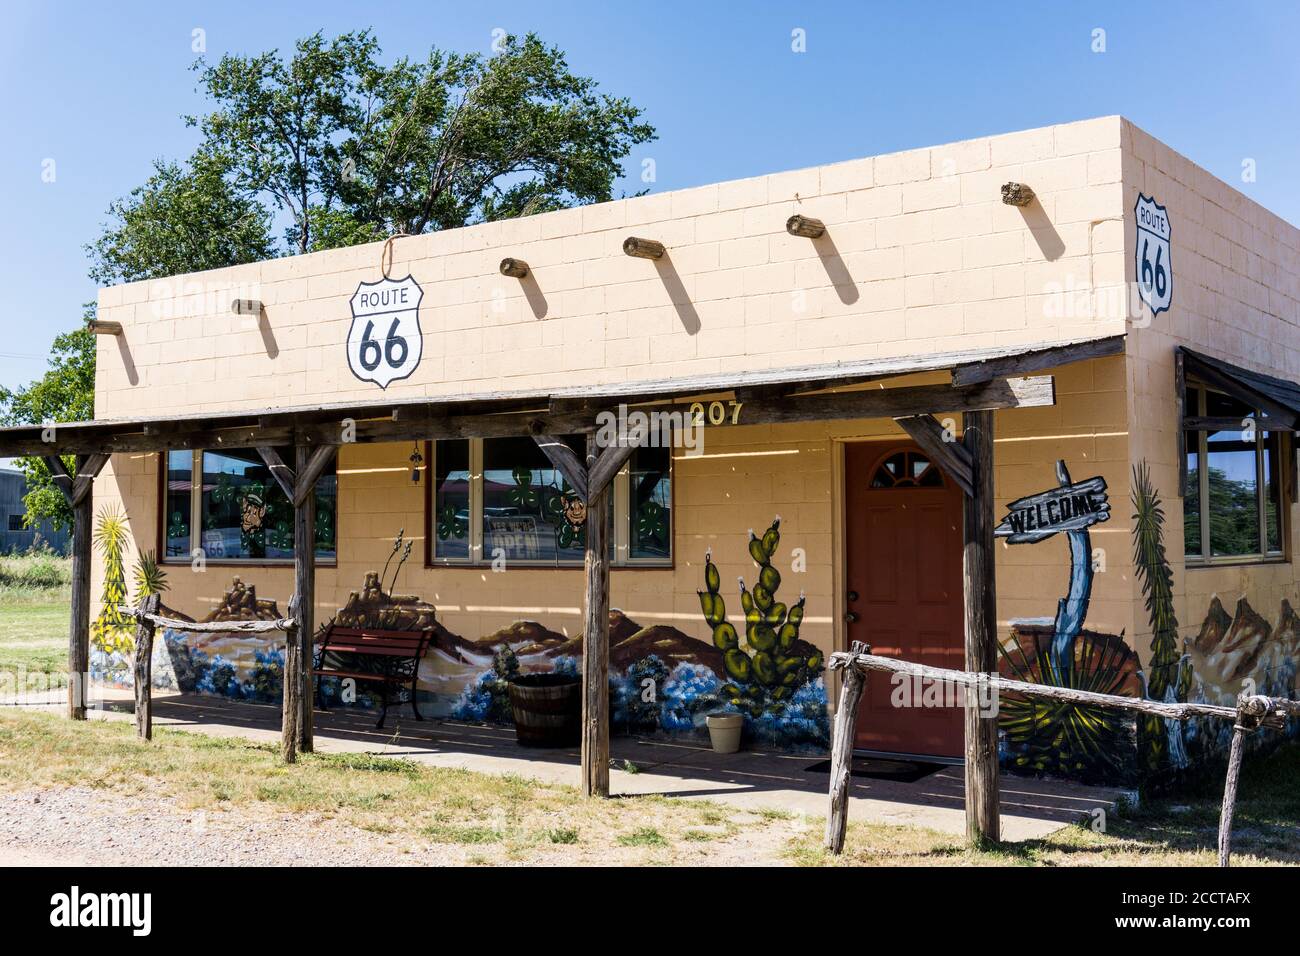 Shamrock, USA - September 11 2015; Building along famous Route 66 Spanish theme with welcome sign on wall. Stock Photo